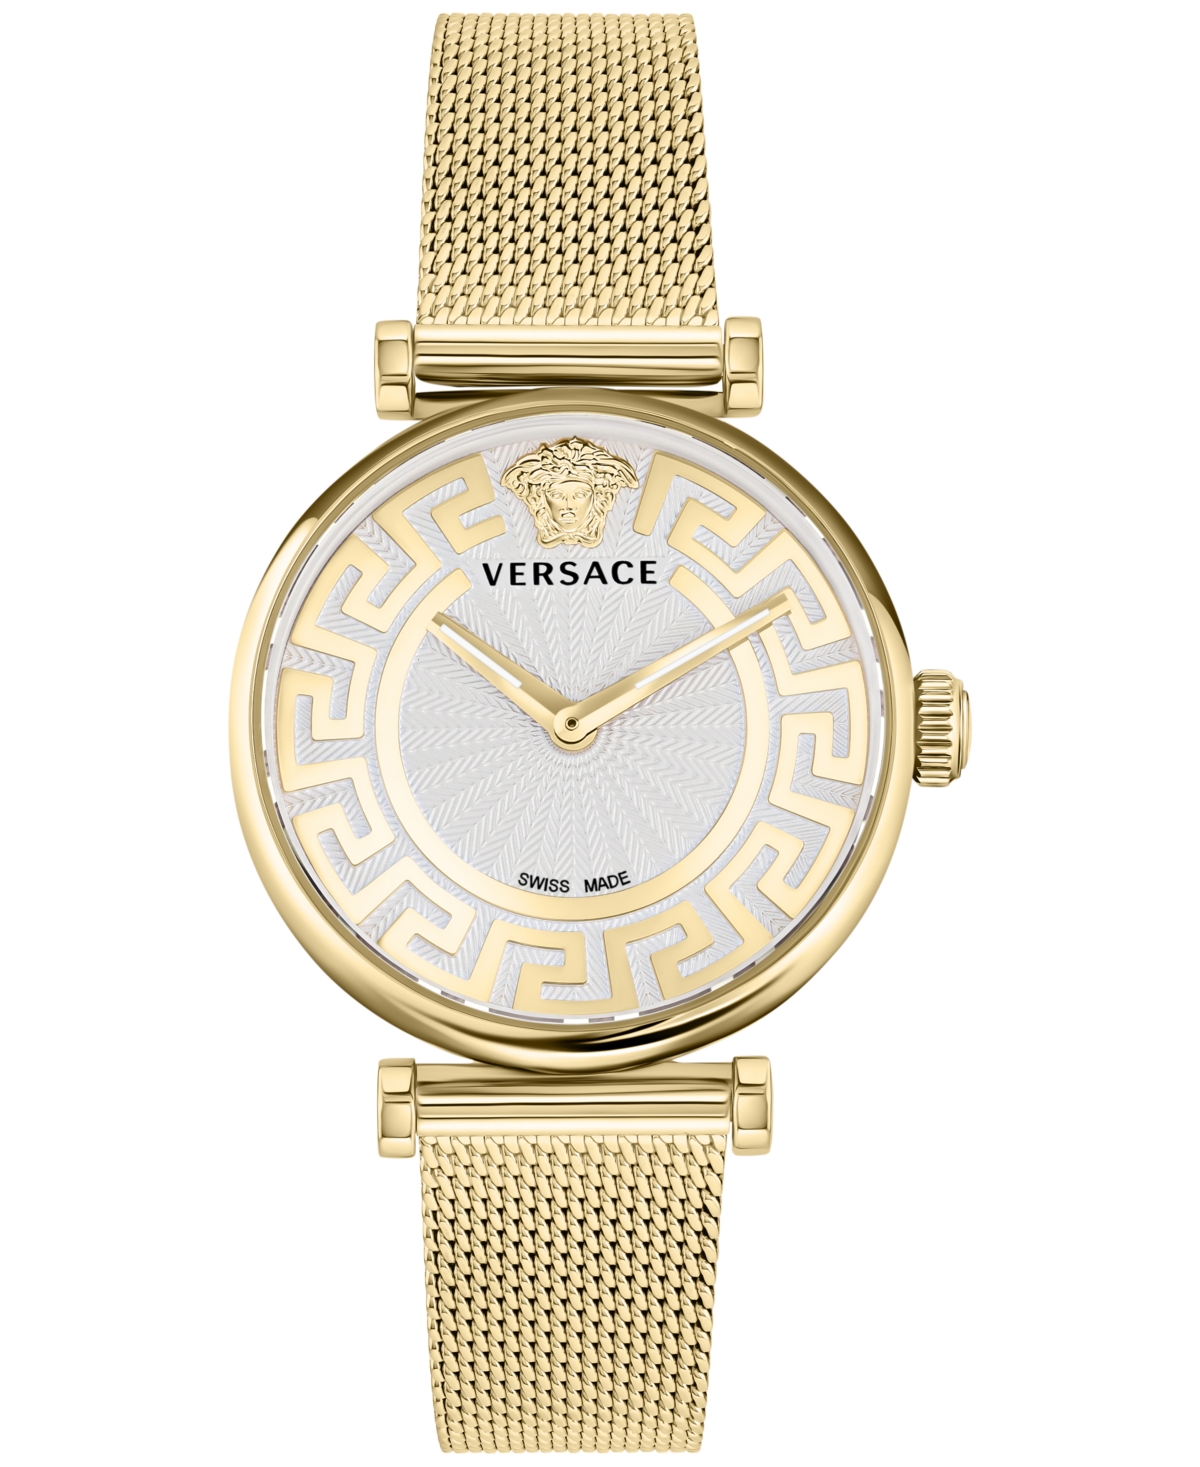 Versace Women's Swiss Greca Chic Gold Ion Plated Stainless Steel Mesh Bracelet Watch 35mm In Ip Yellow Gold